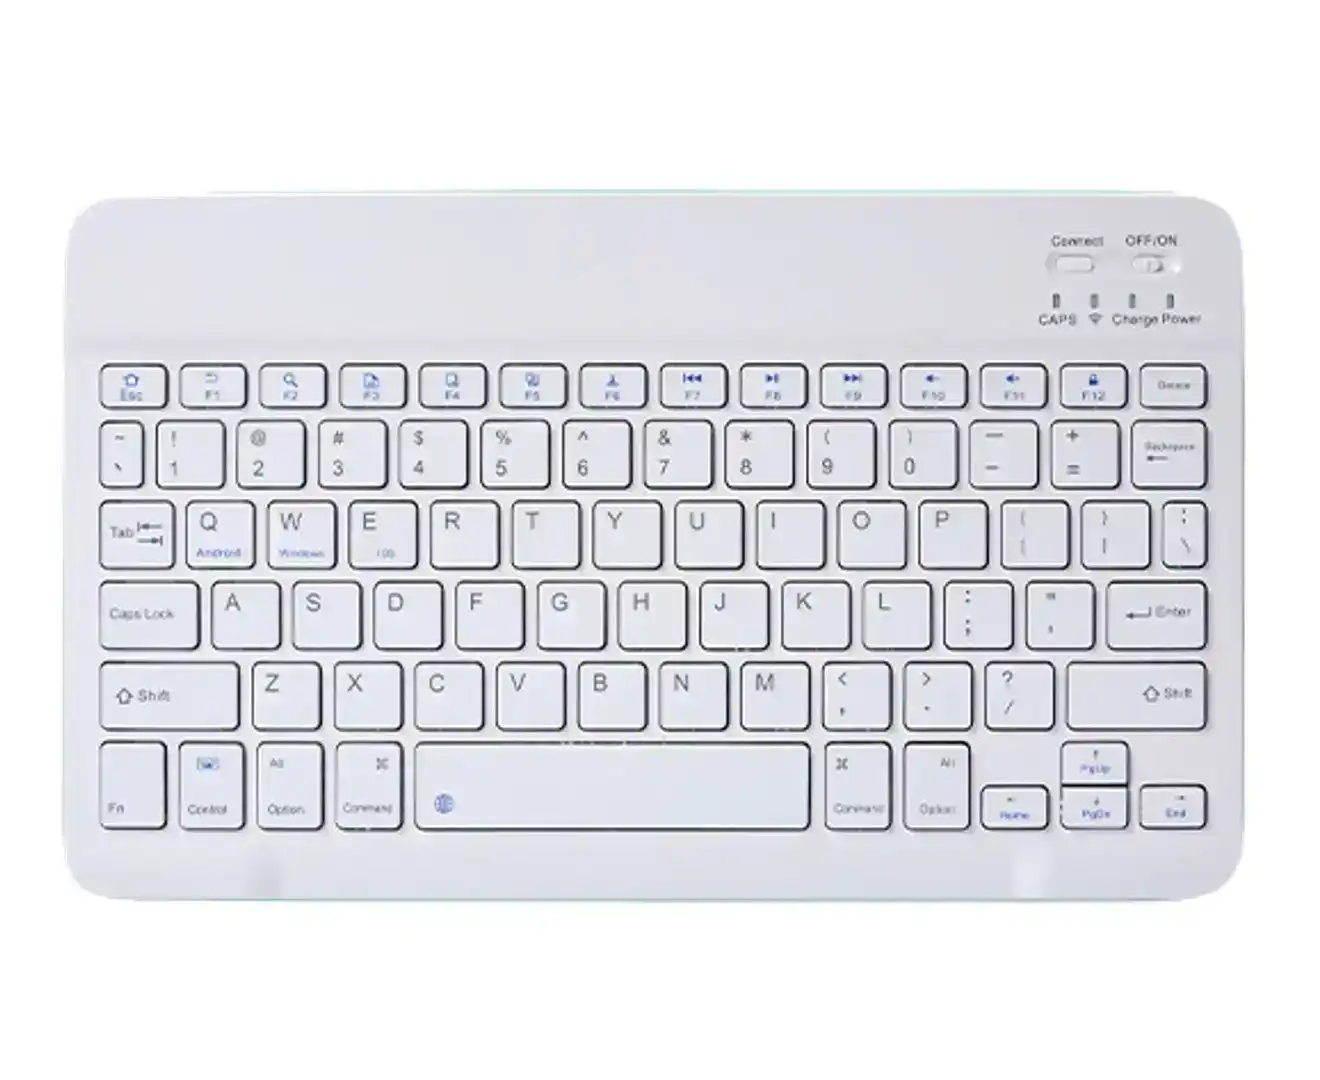 Portable Bluetooth Slim Wireless Keyboard Standalone for Tablets, Smartphones, PCs, White